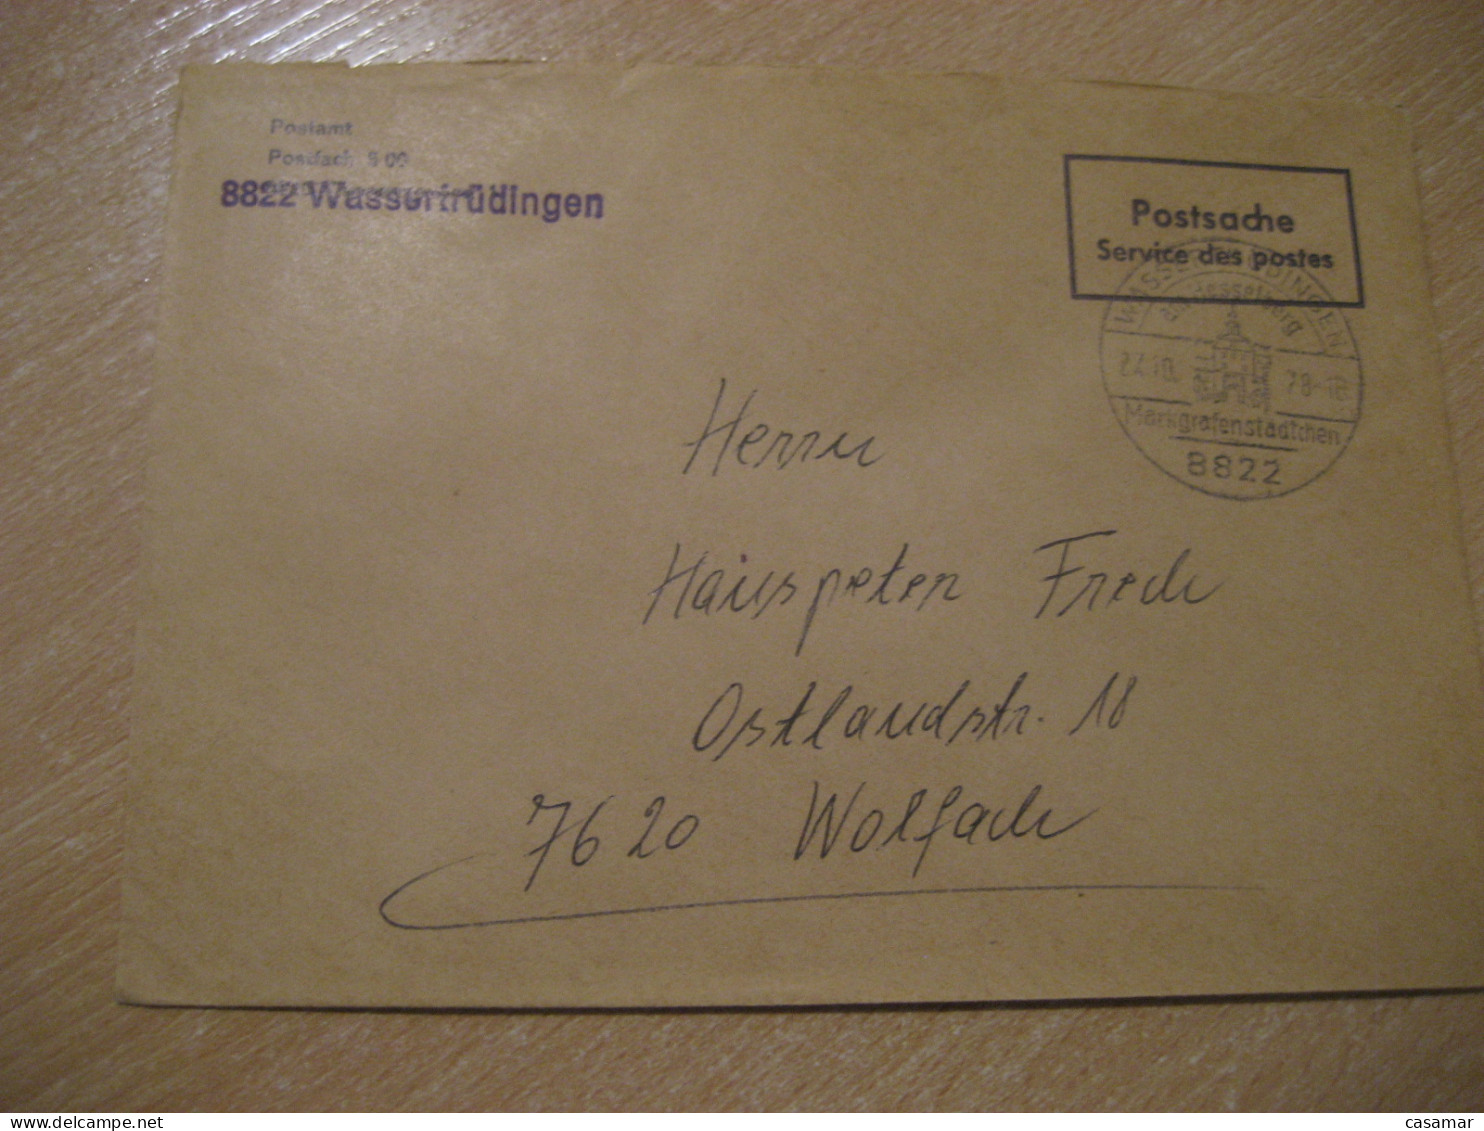 WASSERTRUDINGEN 1978 To Wolfach Postage Paid Cancel Cover GERMANY - Storia Postale